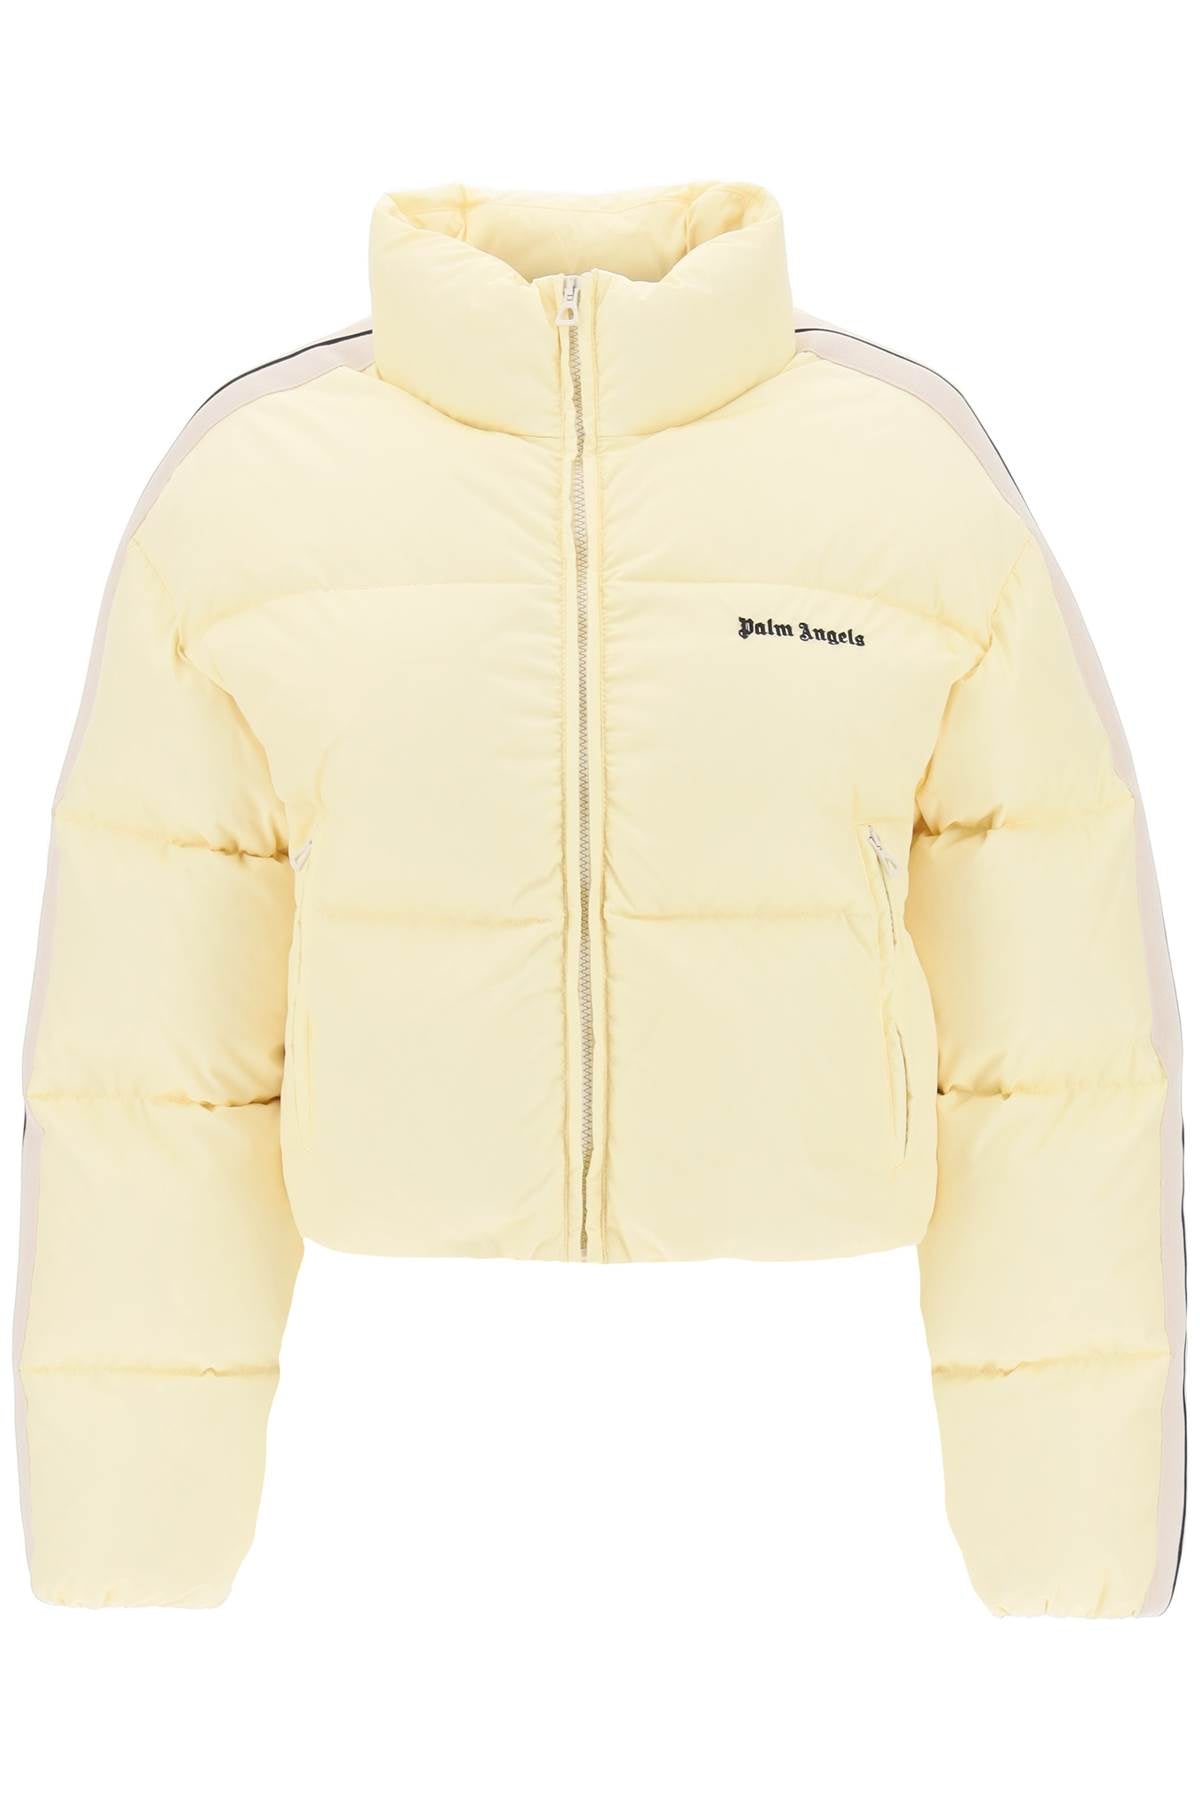 Palm angels cropped puffer jacket with bands on sleeves-0